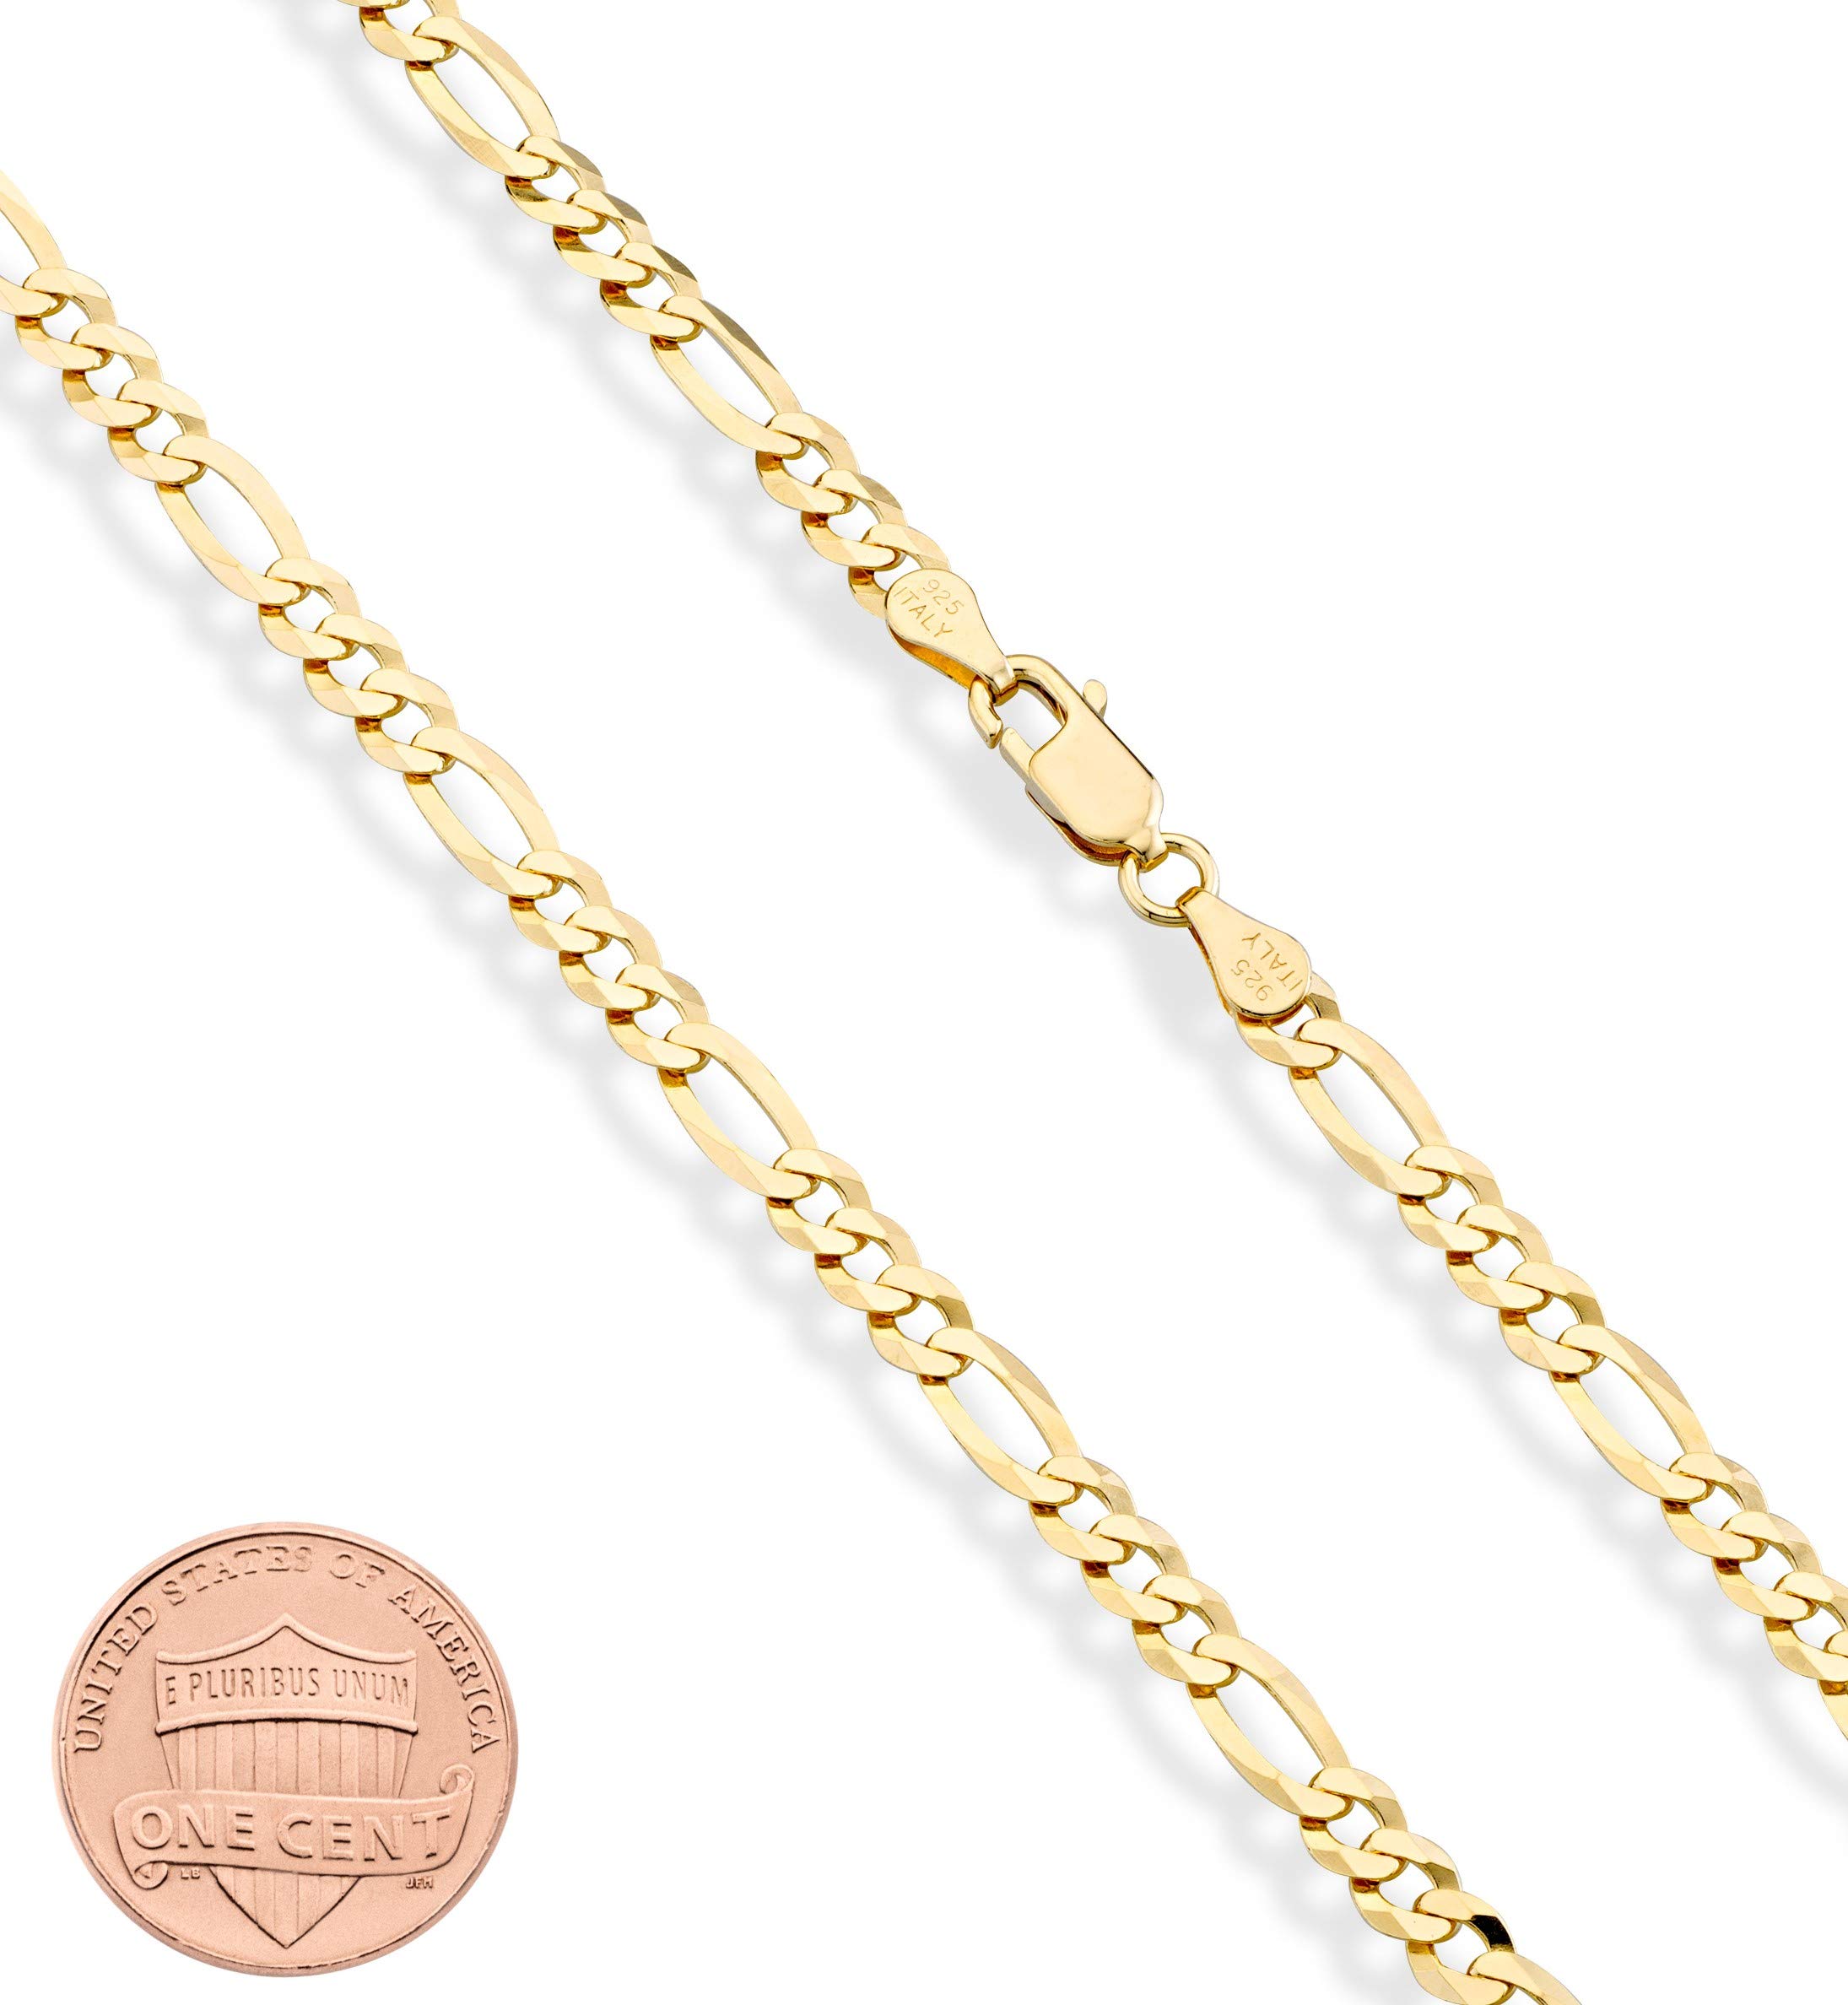 Miabella Solid 18K Gold Over Sterling Silver Italian 5mm Diamond-Cut Figaro Link Chain Necklace for Women Men, 925 Made in Italy